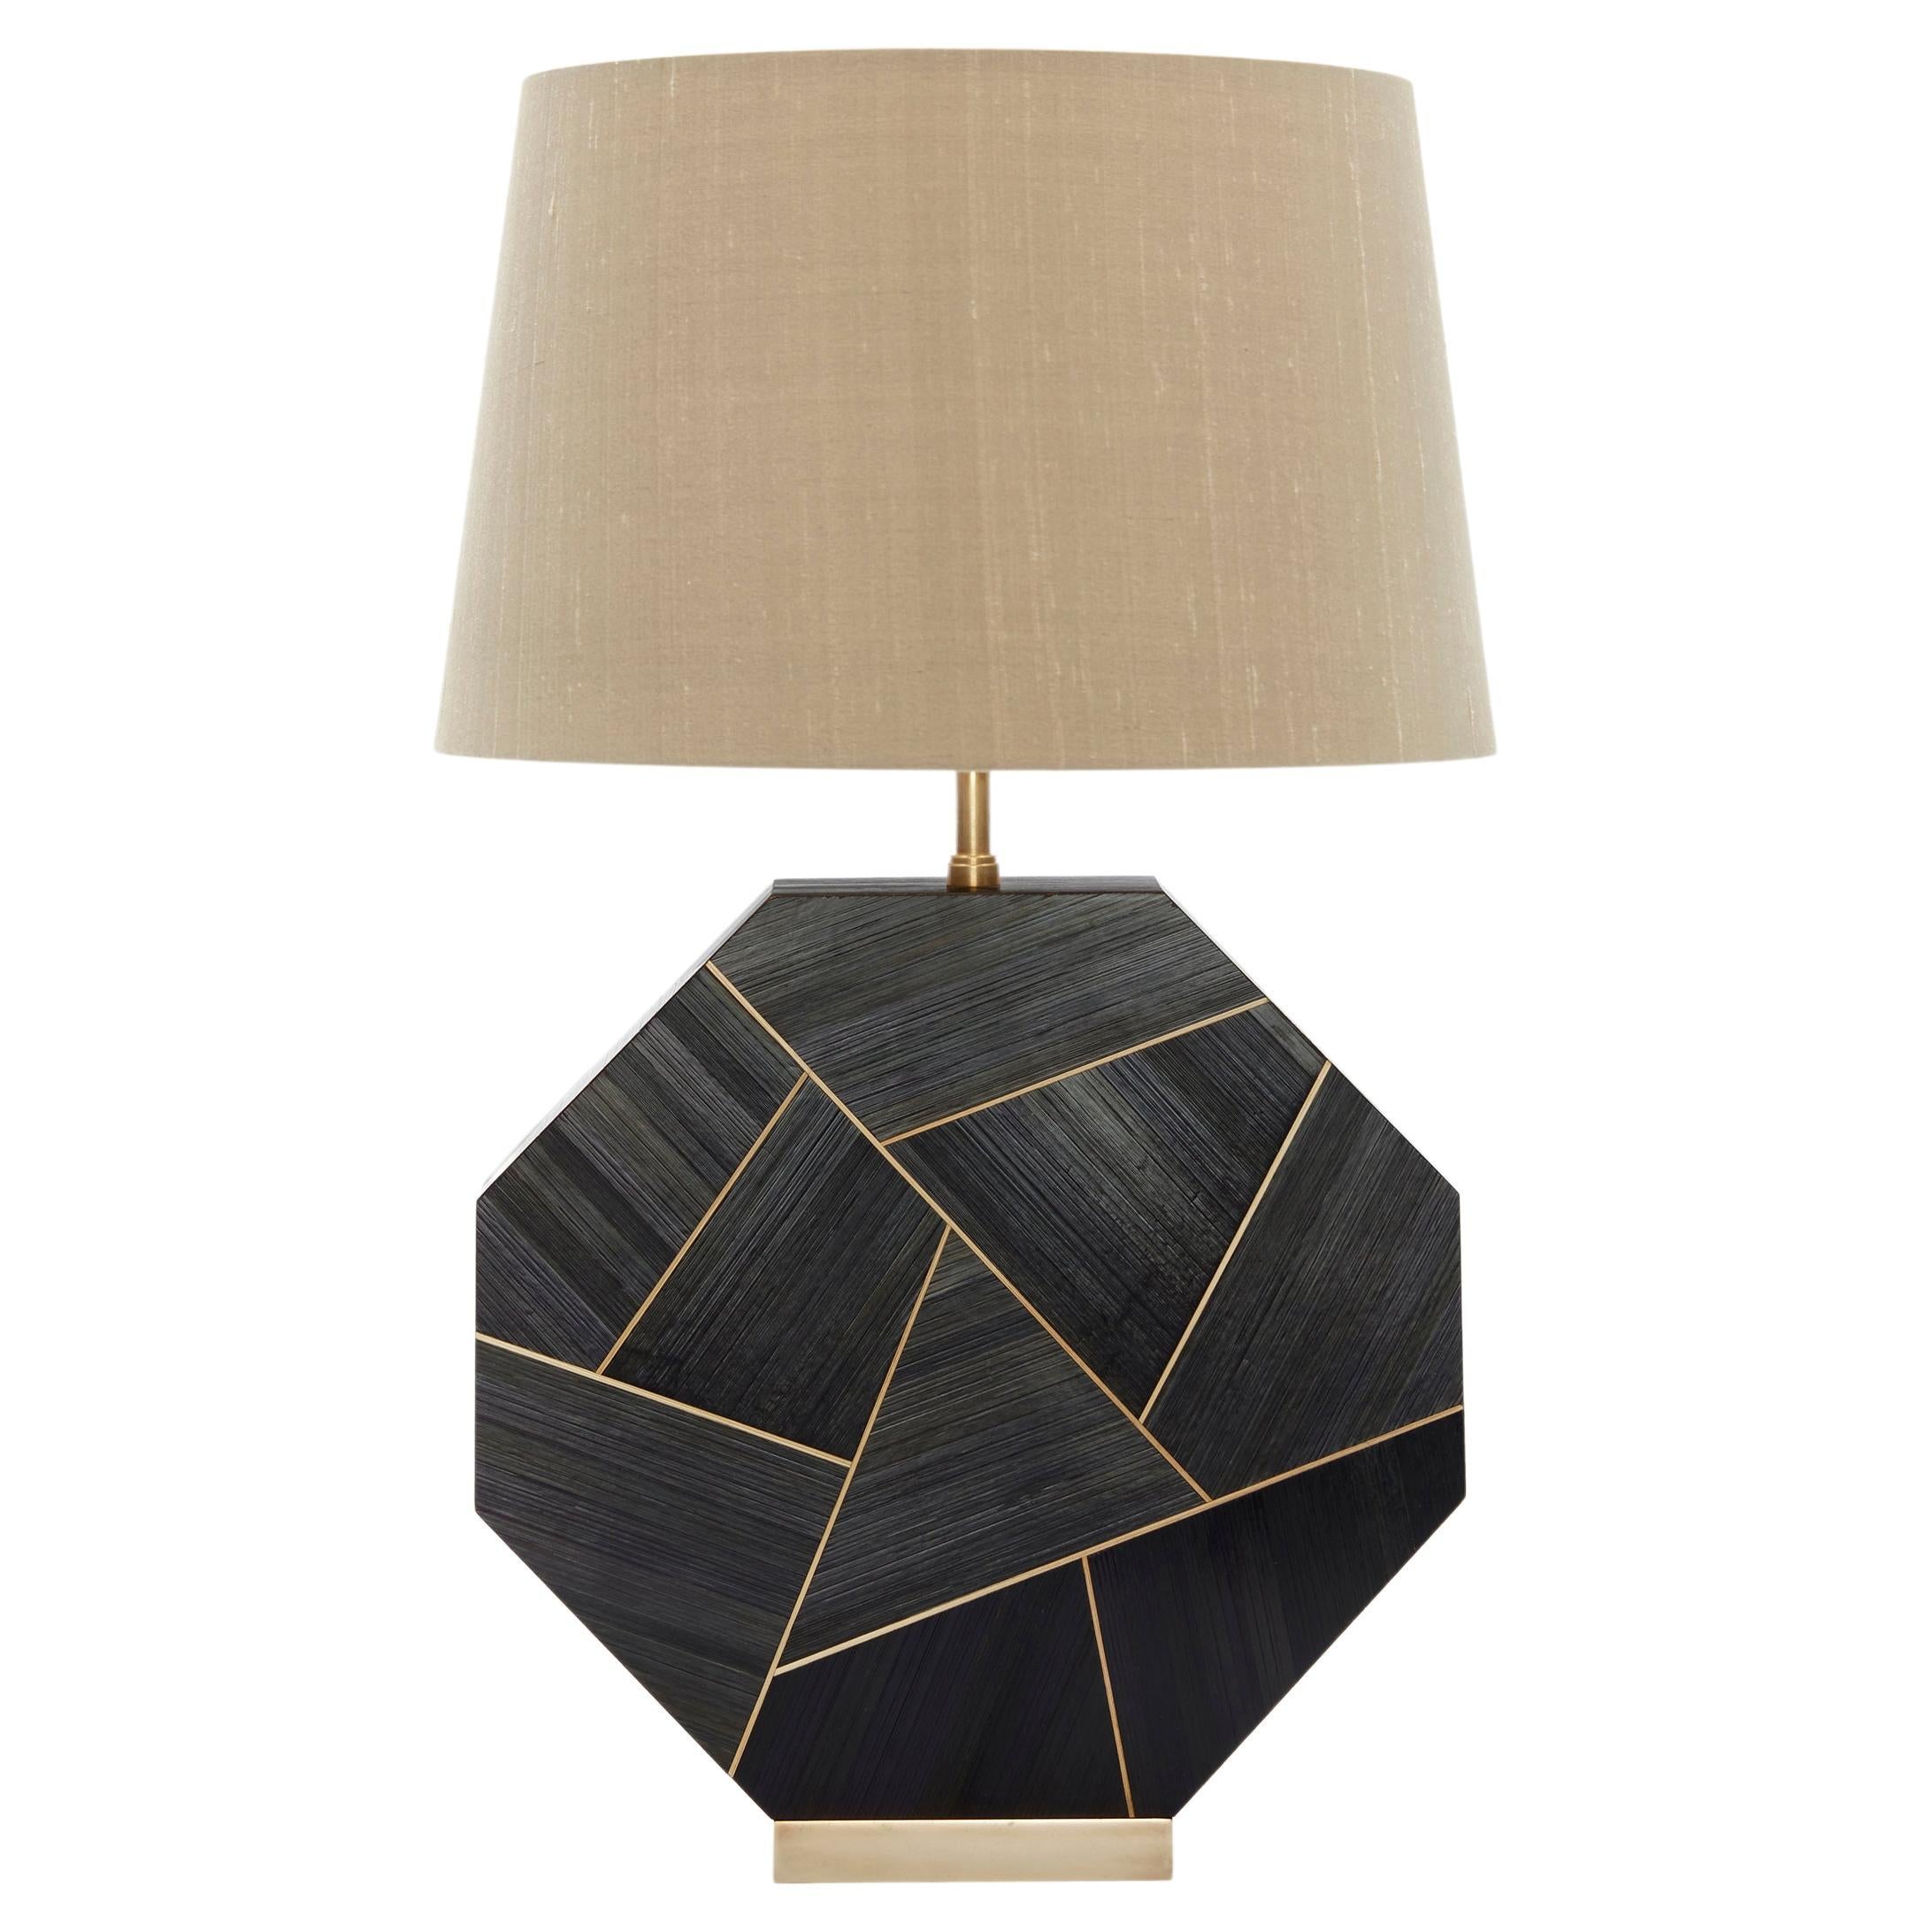 Octagonal Black Straw Marquetry Table Lamp Handmade in Uk Contemporary